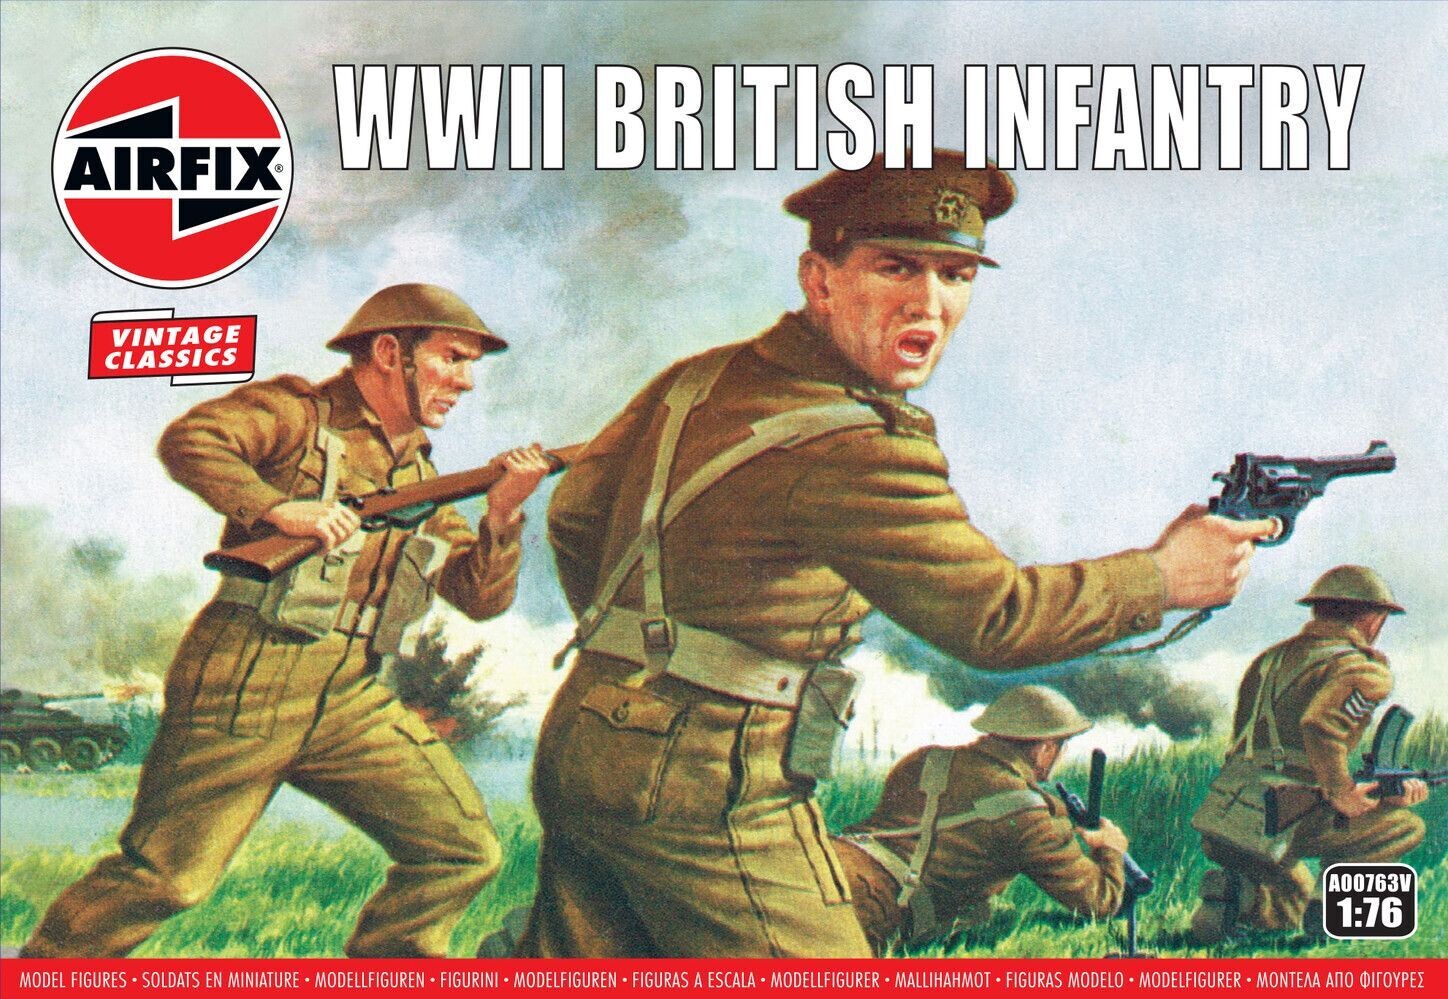 Airfix A00763V WWII British Infantry N. Europe 1:76 Scale Plastic Model Military Figures